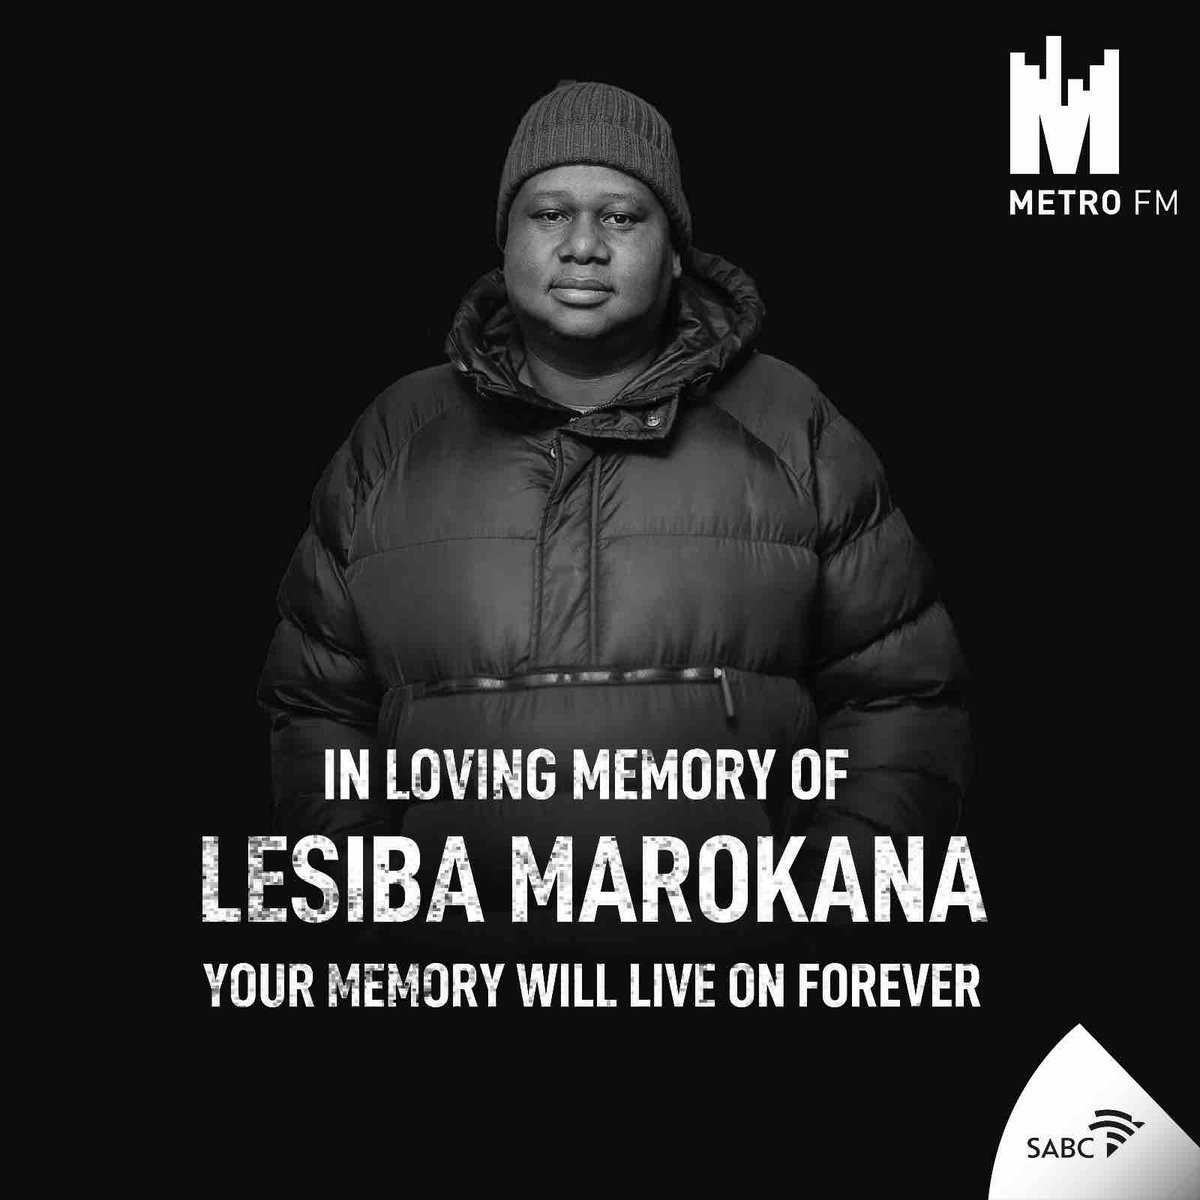 It is with great sadness that we announce the death of our beloved music compiler, Lesiba Marokana, who passed away yesterday.

Our thoughts and prayers are with his family, friends and colleagues. #RIPLesiba